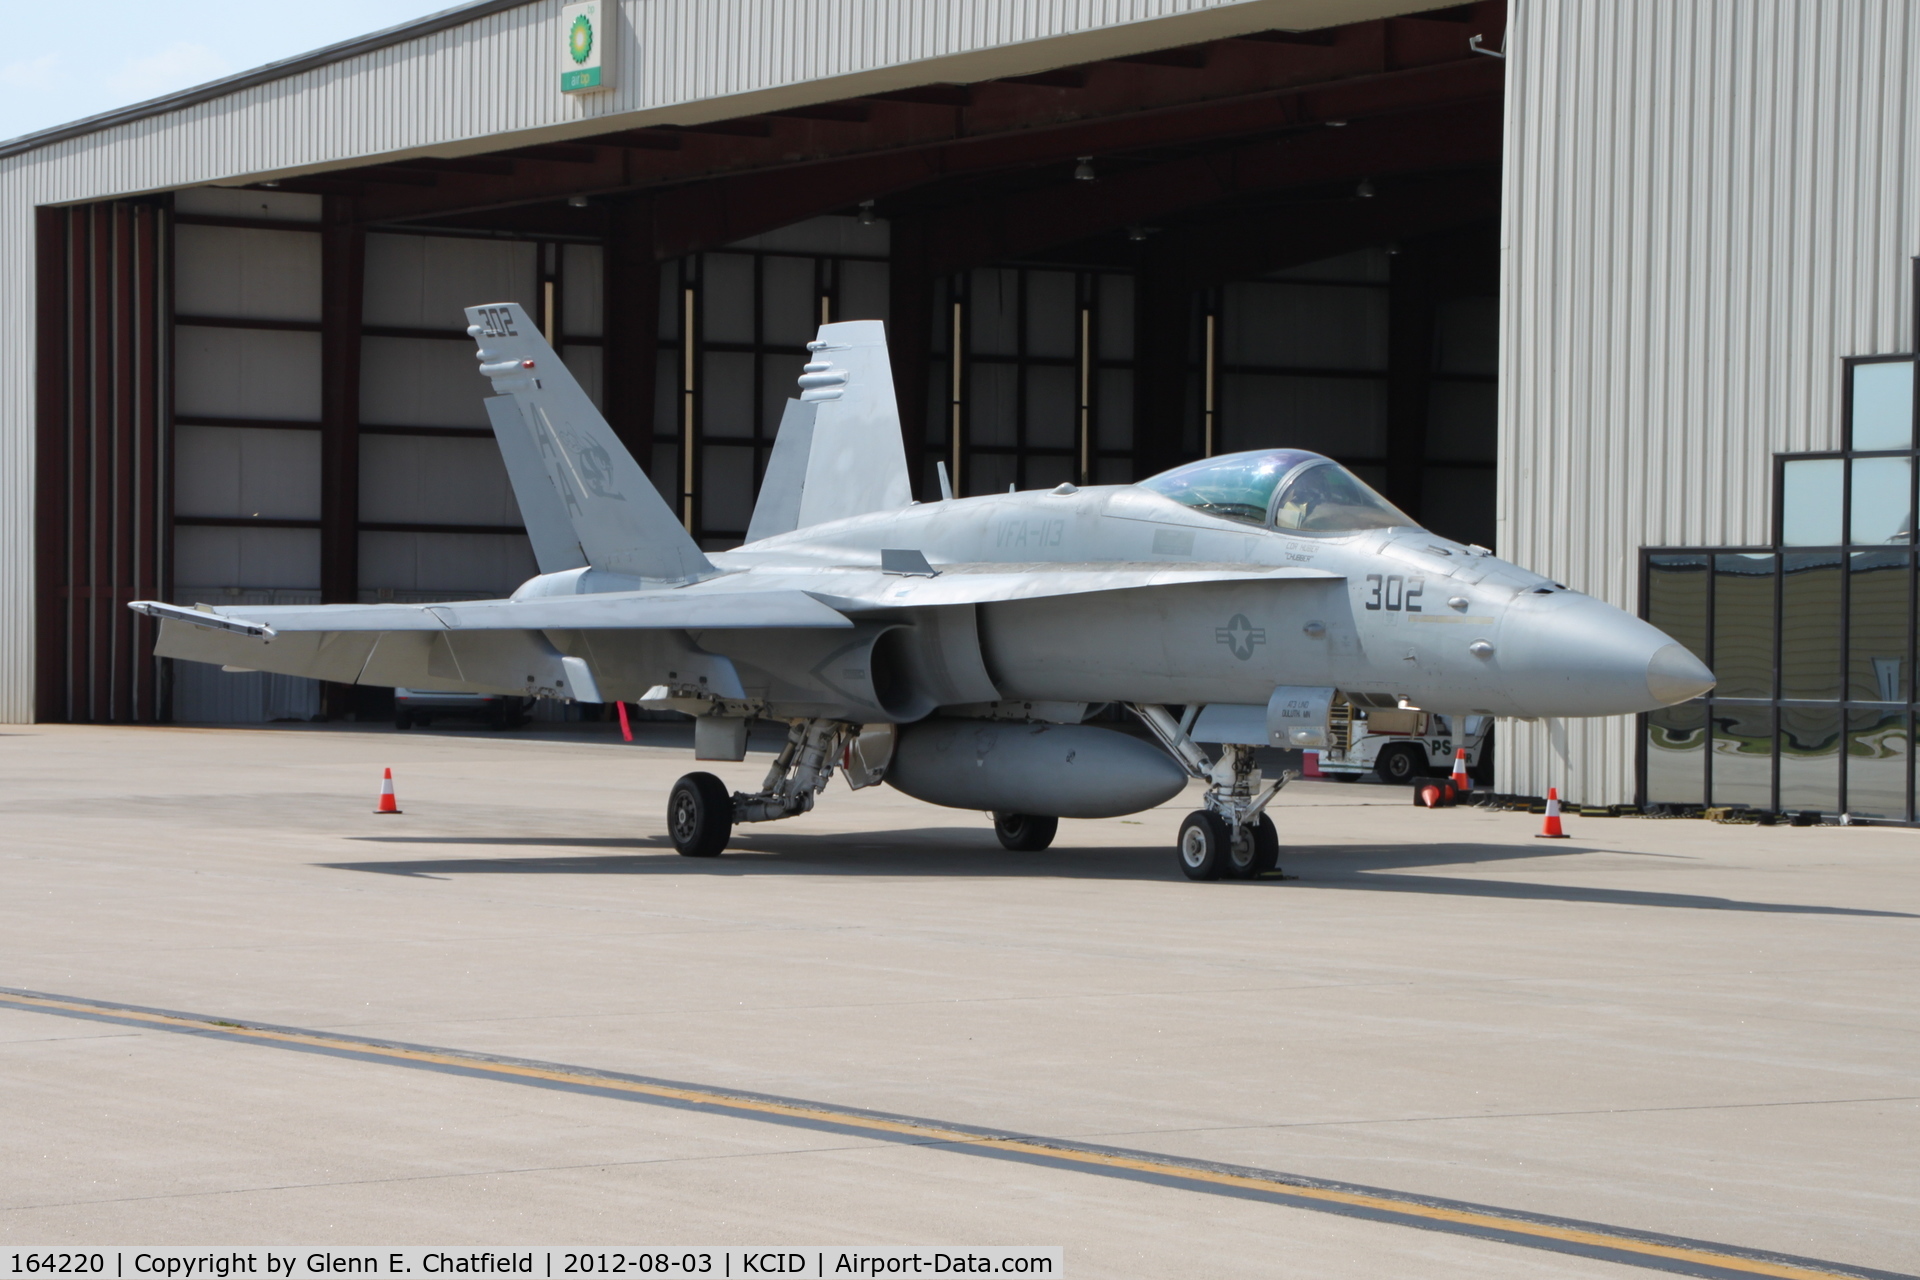 164220, 1990 McDonnell Douglas F/A-18C Hornet C/N 0983/C209, Stopping for fuel